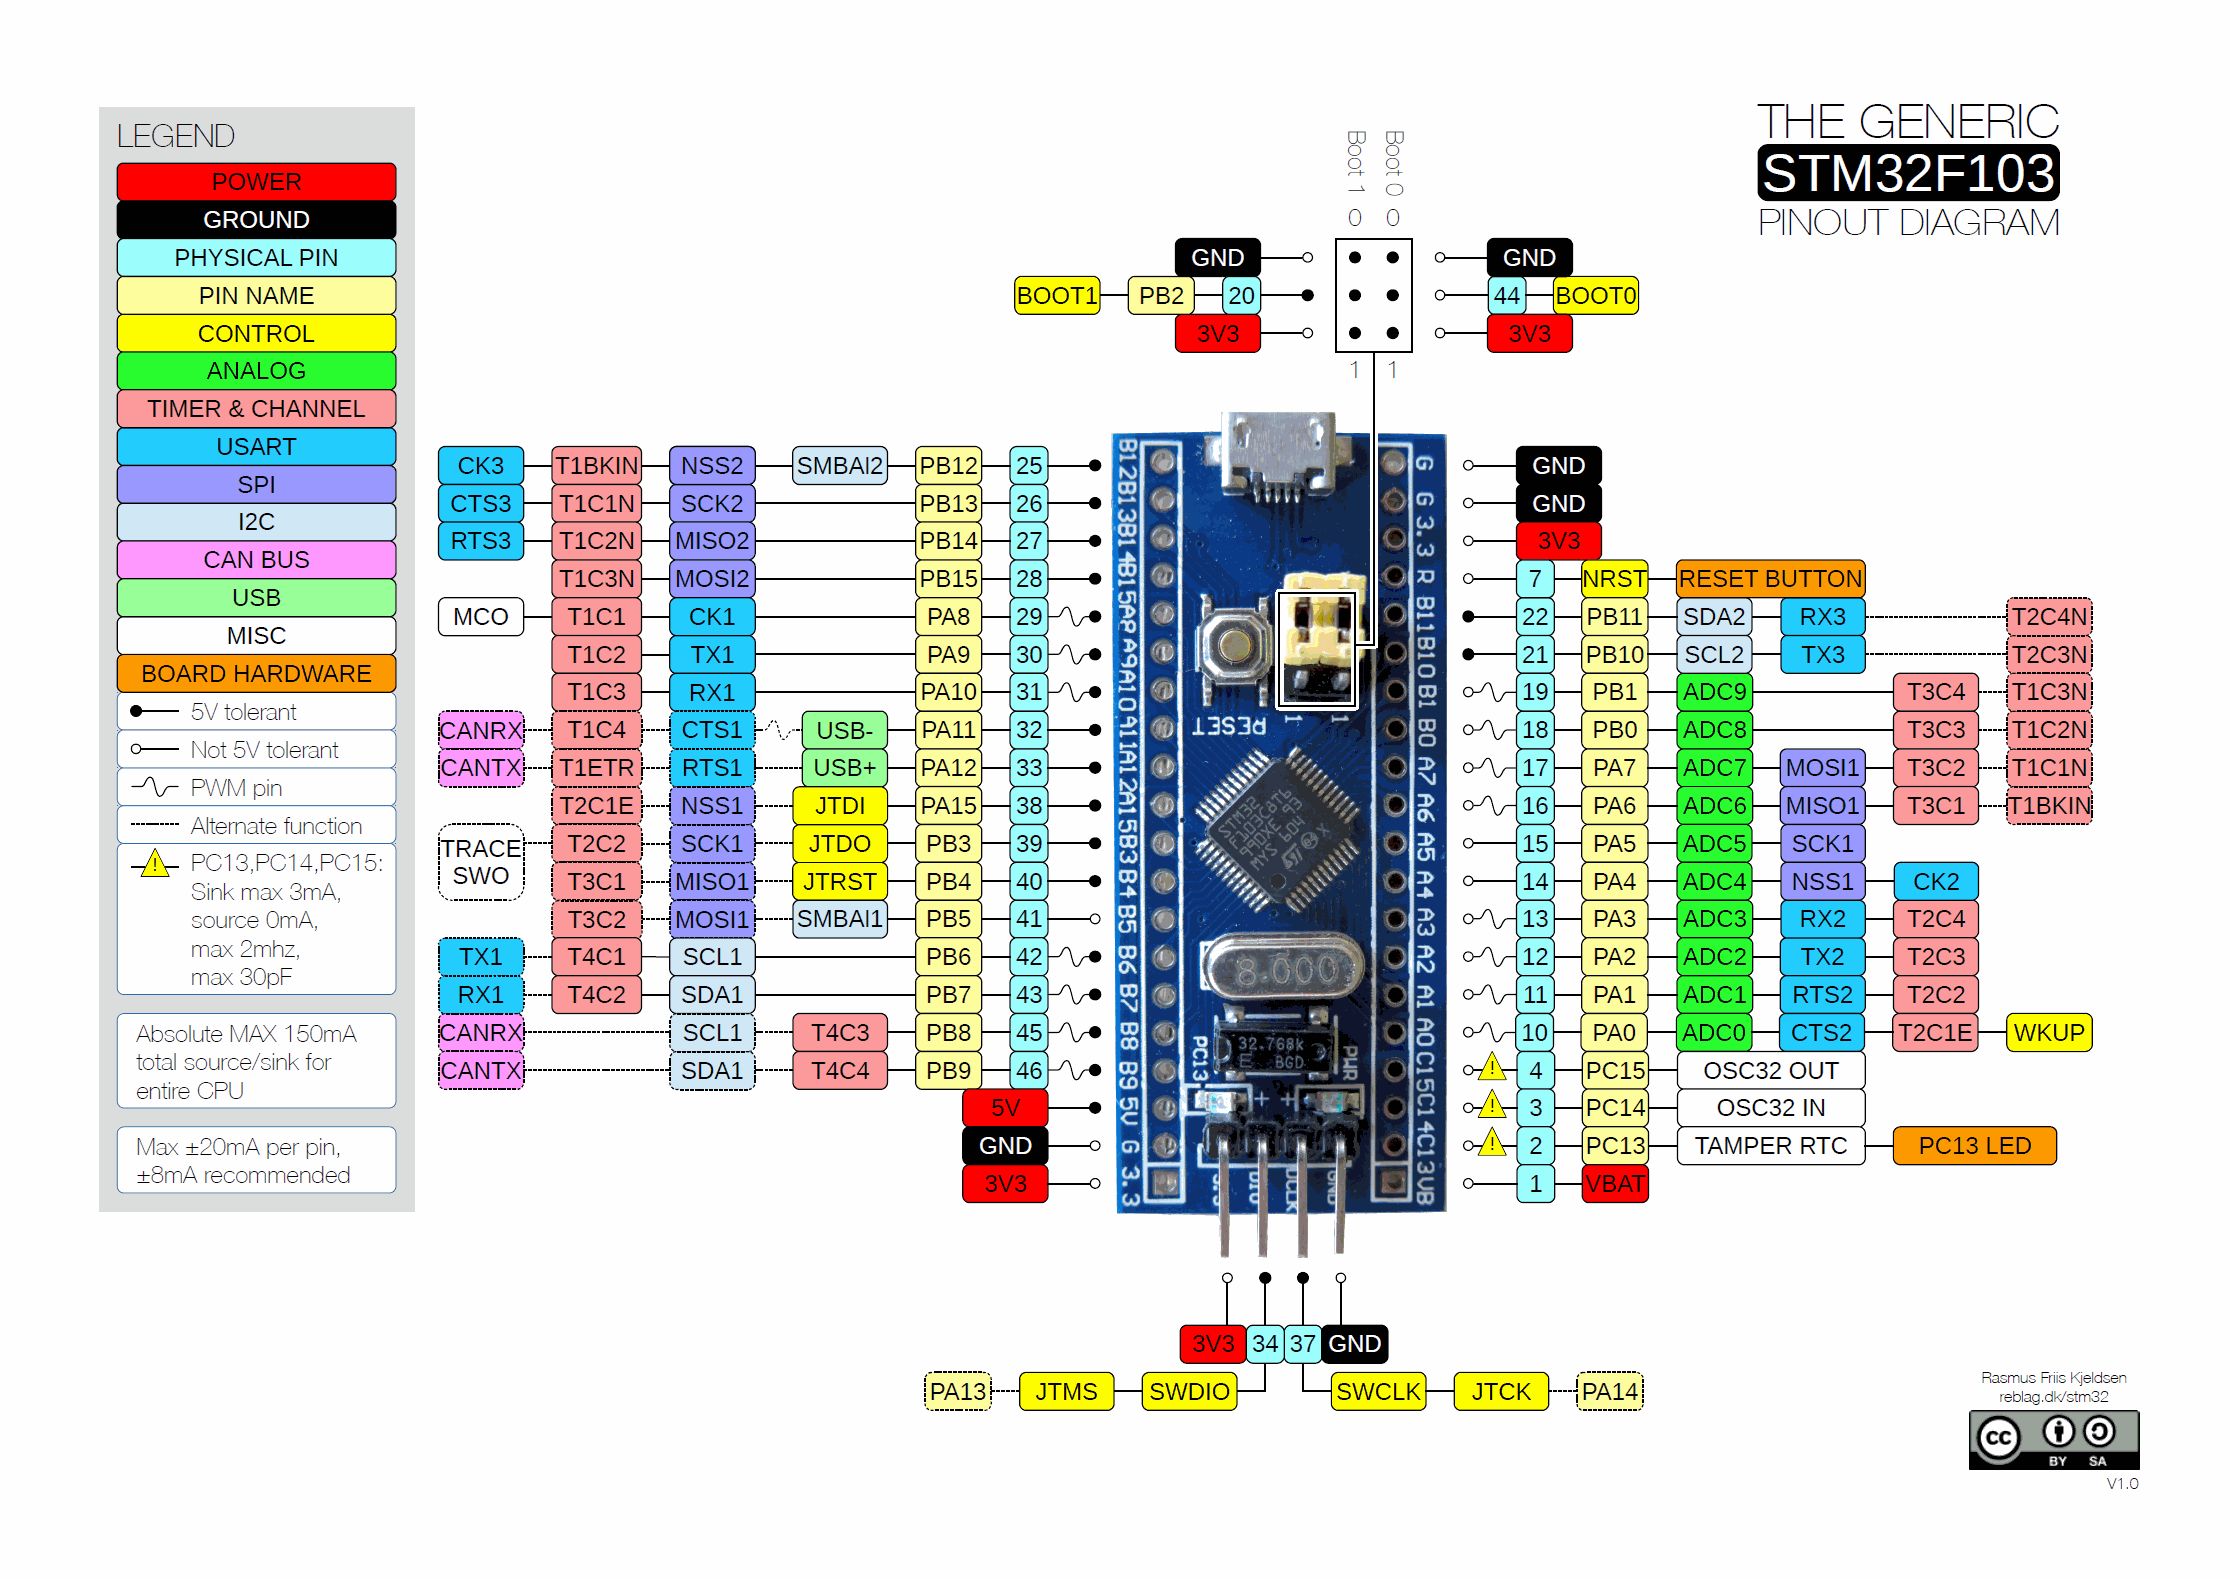 The STM32 BluePill diagram